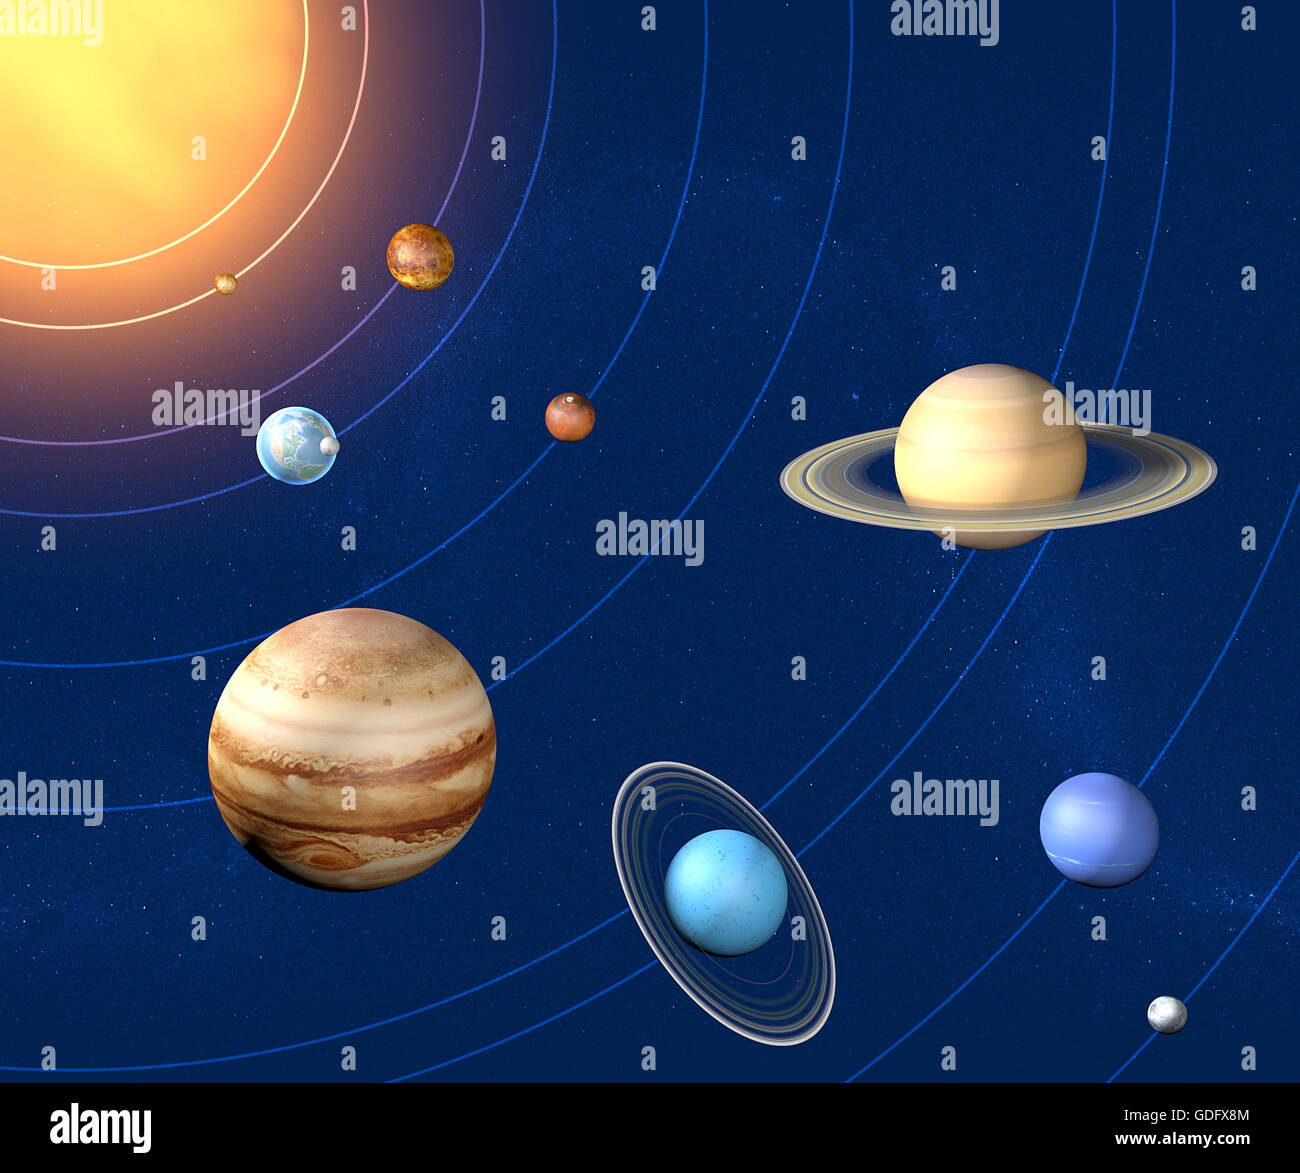 Solar system planets diameter ratio, quantities and sizes Stock Photo